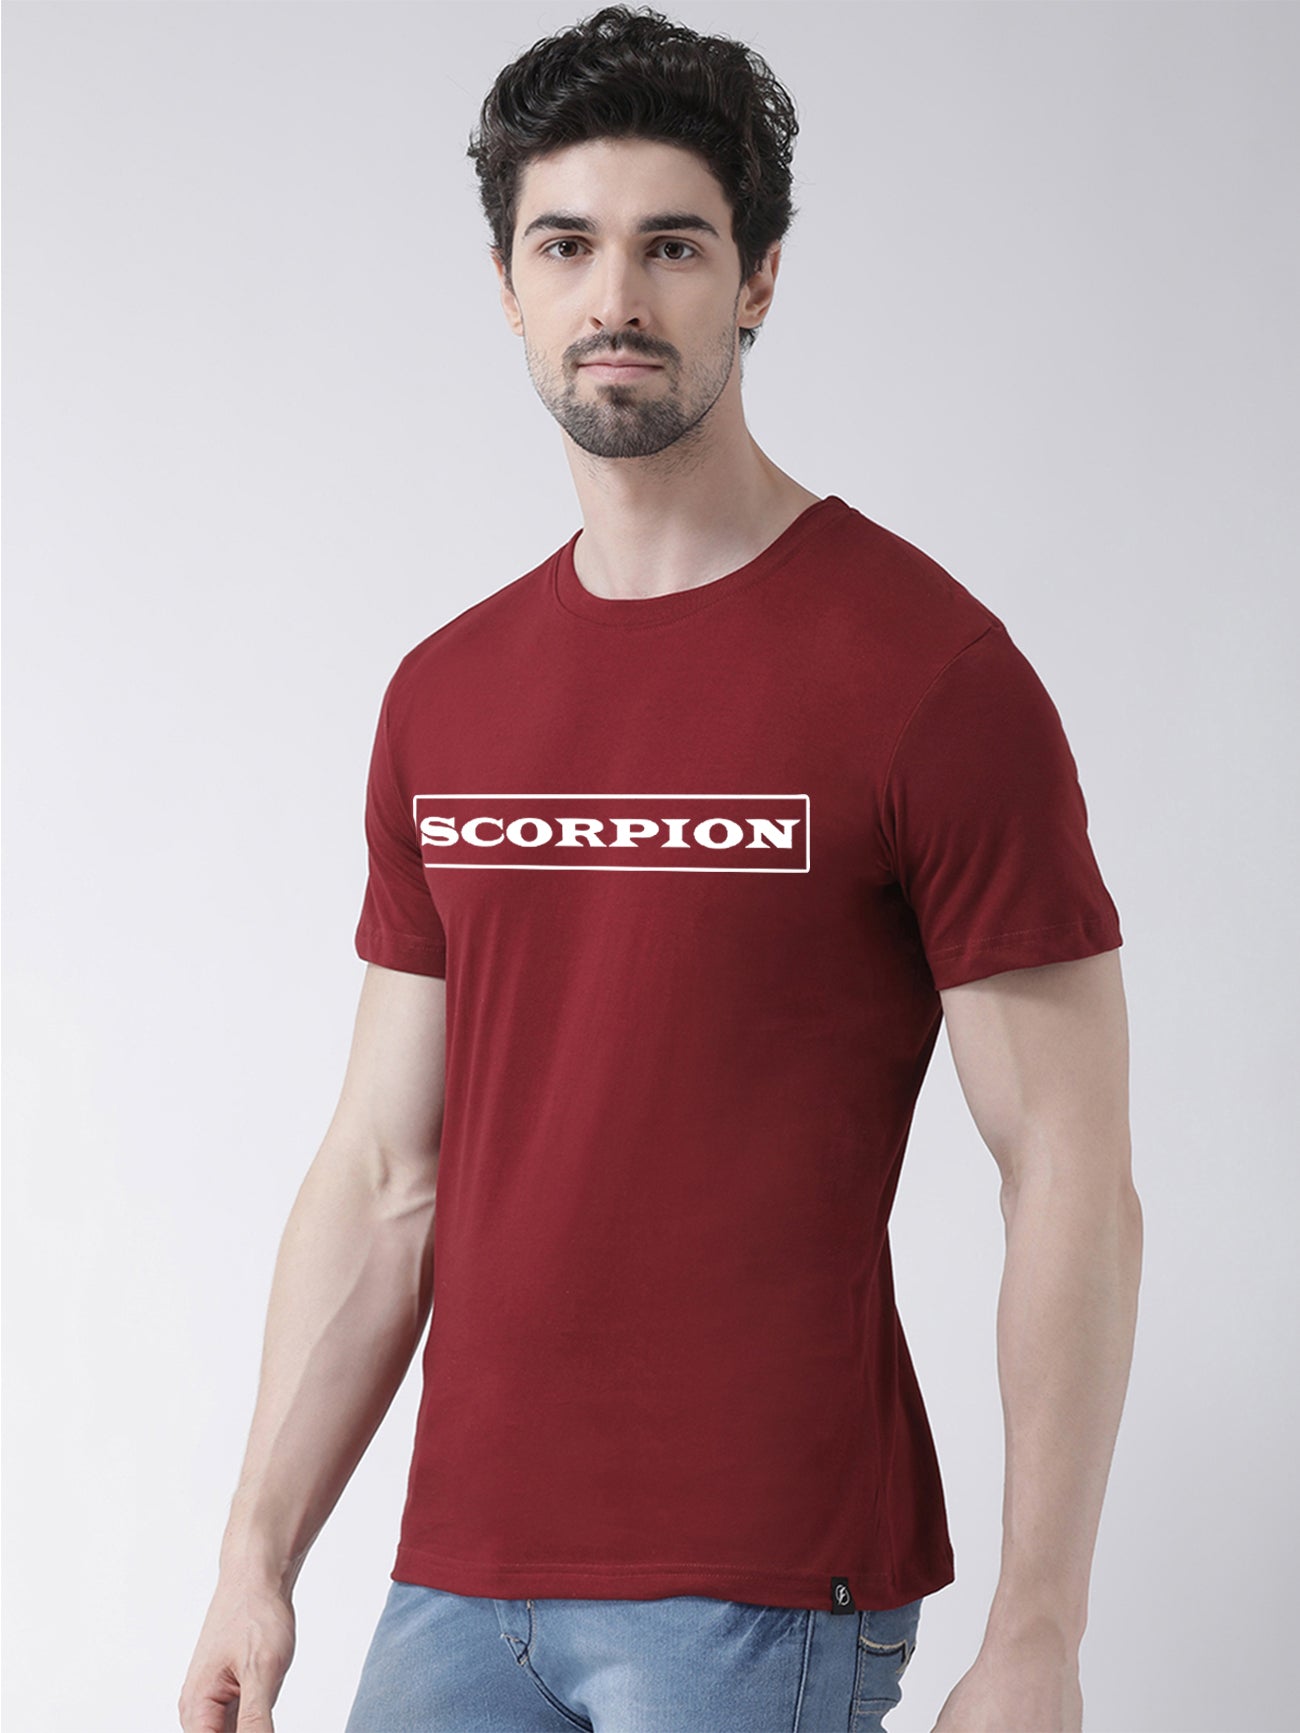 Scorpion Printed Round Neck T-shirt - Friskers